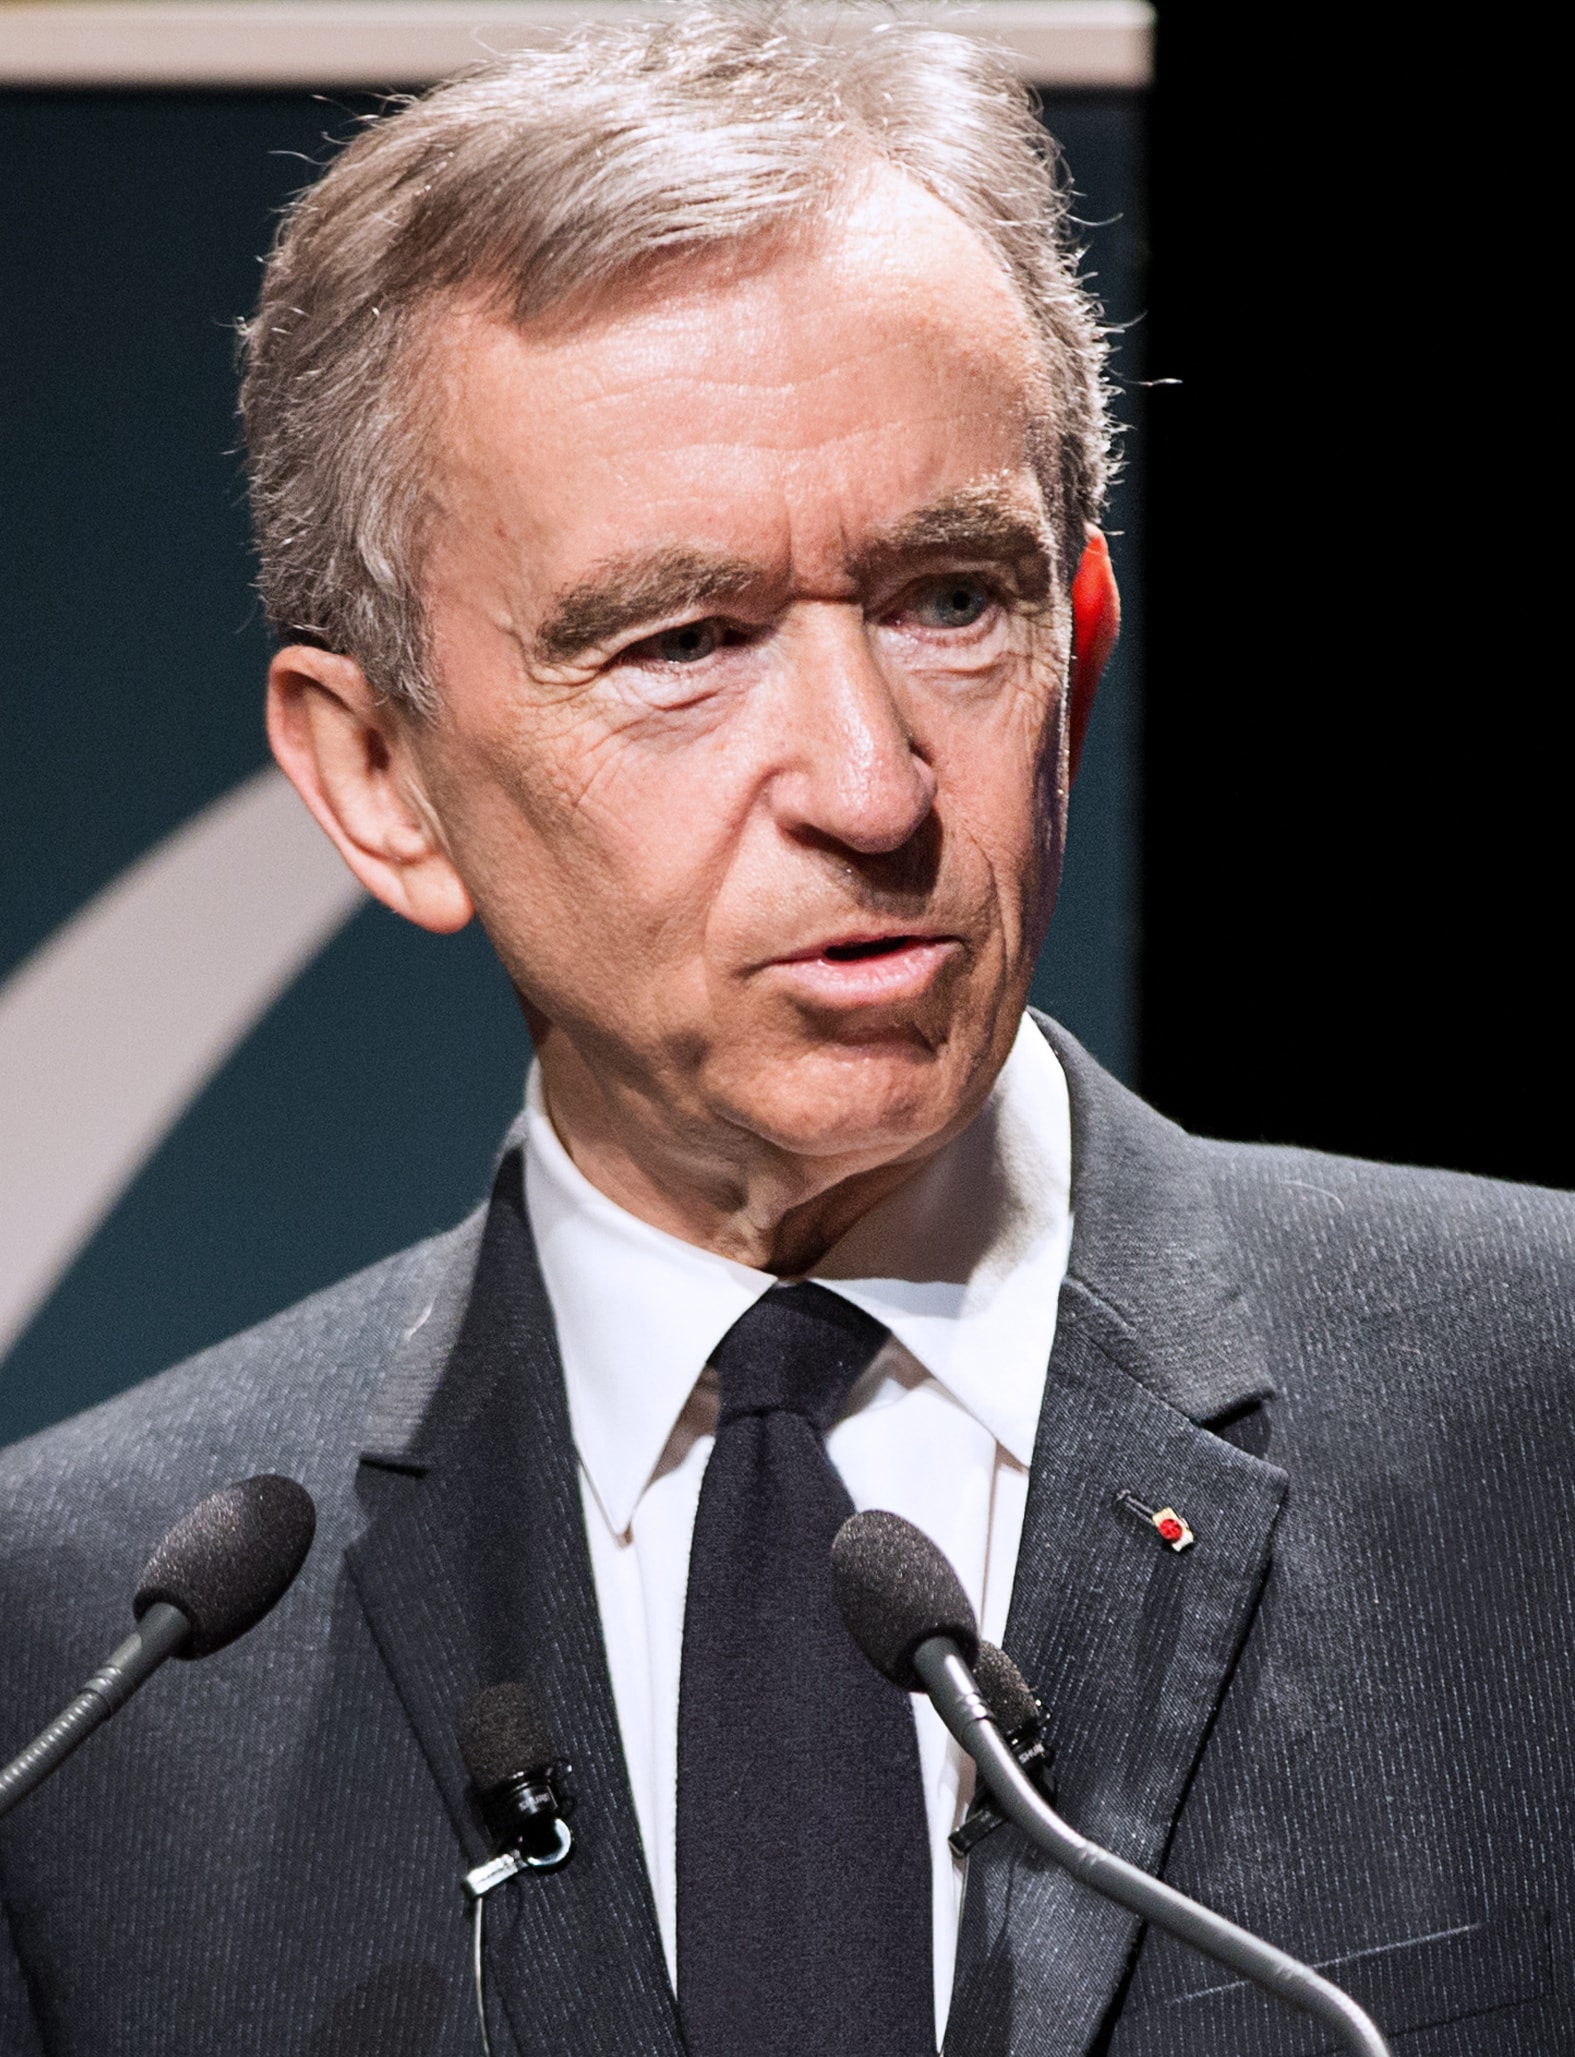 LVMH CEO Bernard Arnault recently sold his private aircraft so no one can  see where I go, and he now rents jets instead. Apple CEO Tim Cook also  only charters private jets